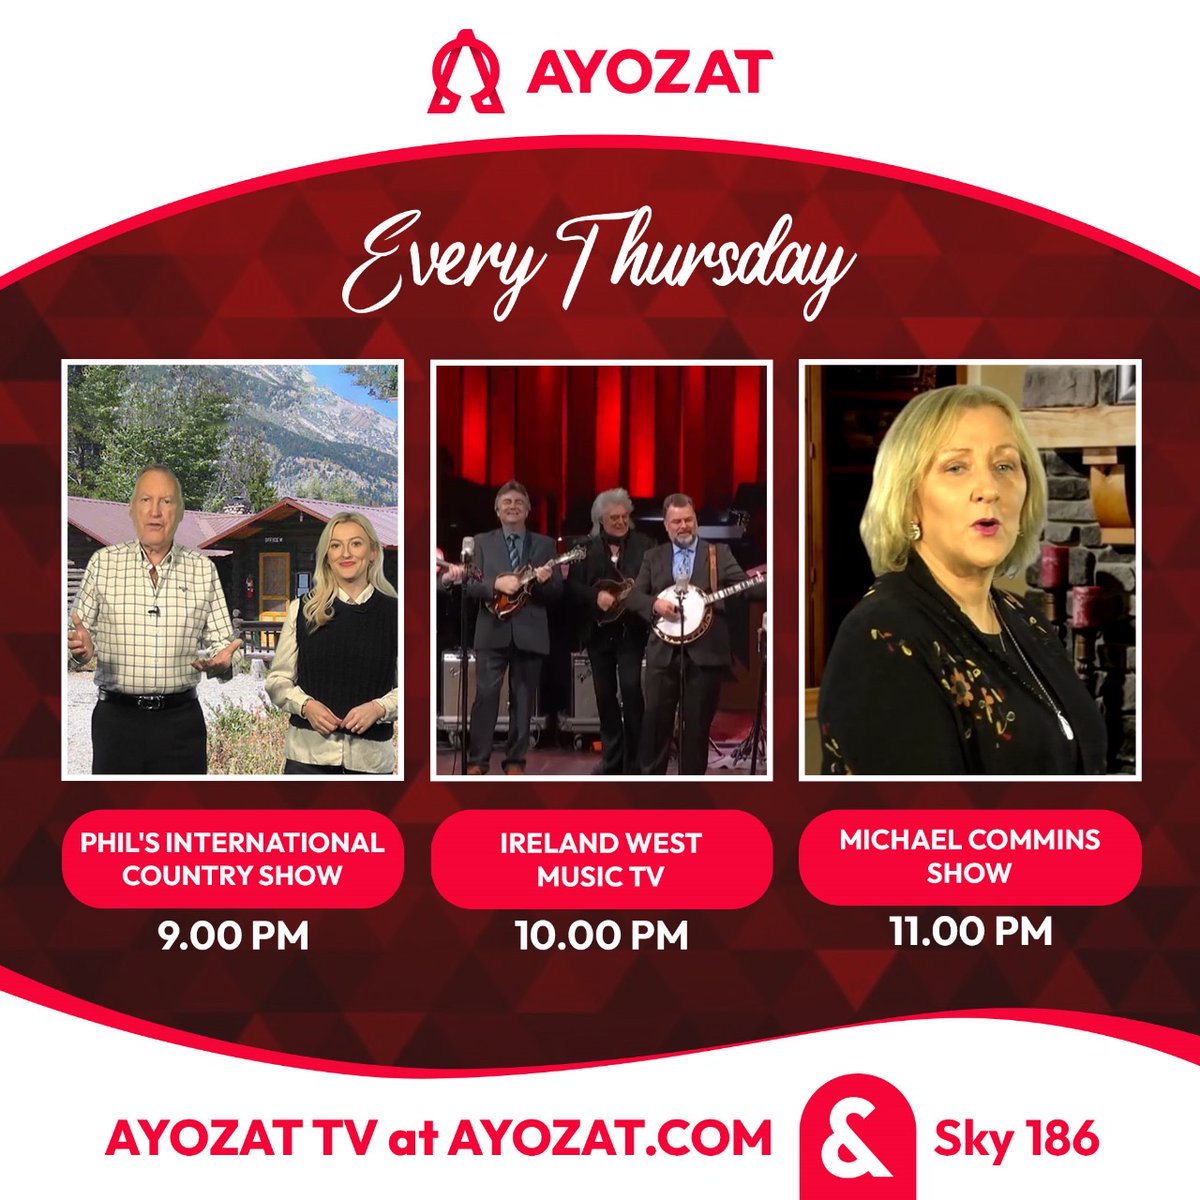 Watch Phil's International Country Show at 9pm, Ireland West Music TV at 10pm and The Michael Commins Show at 11pm every Thursday on AYOZAT TV at ayozat.com and Sky 186. #philsinternationalcountryshow #irelandwestmusictv #themichaelcomminsshow @musicmemoriestv @iwmTV